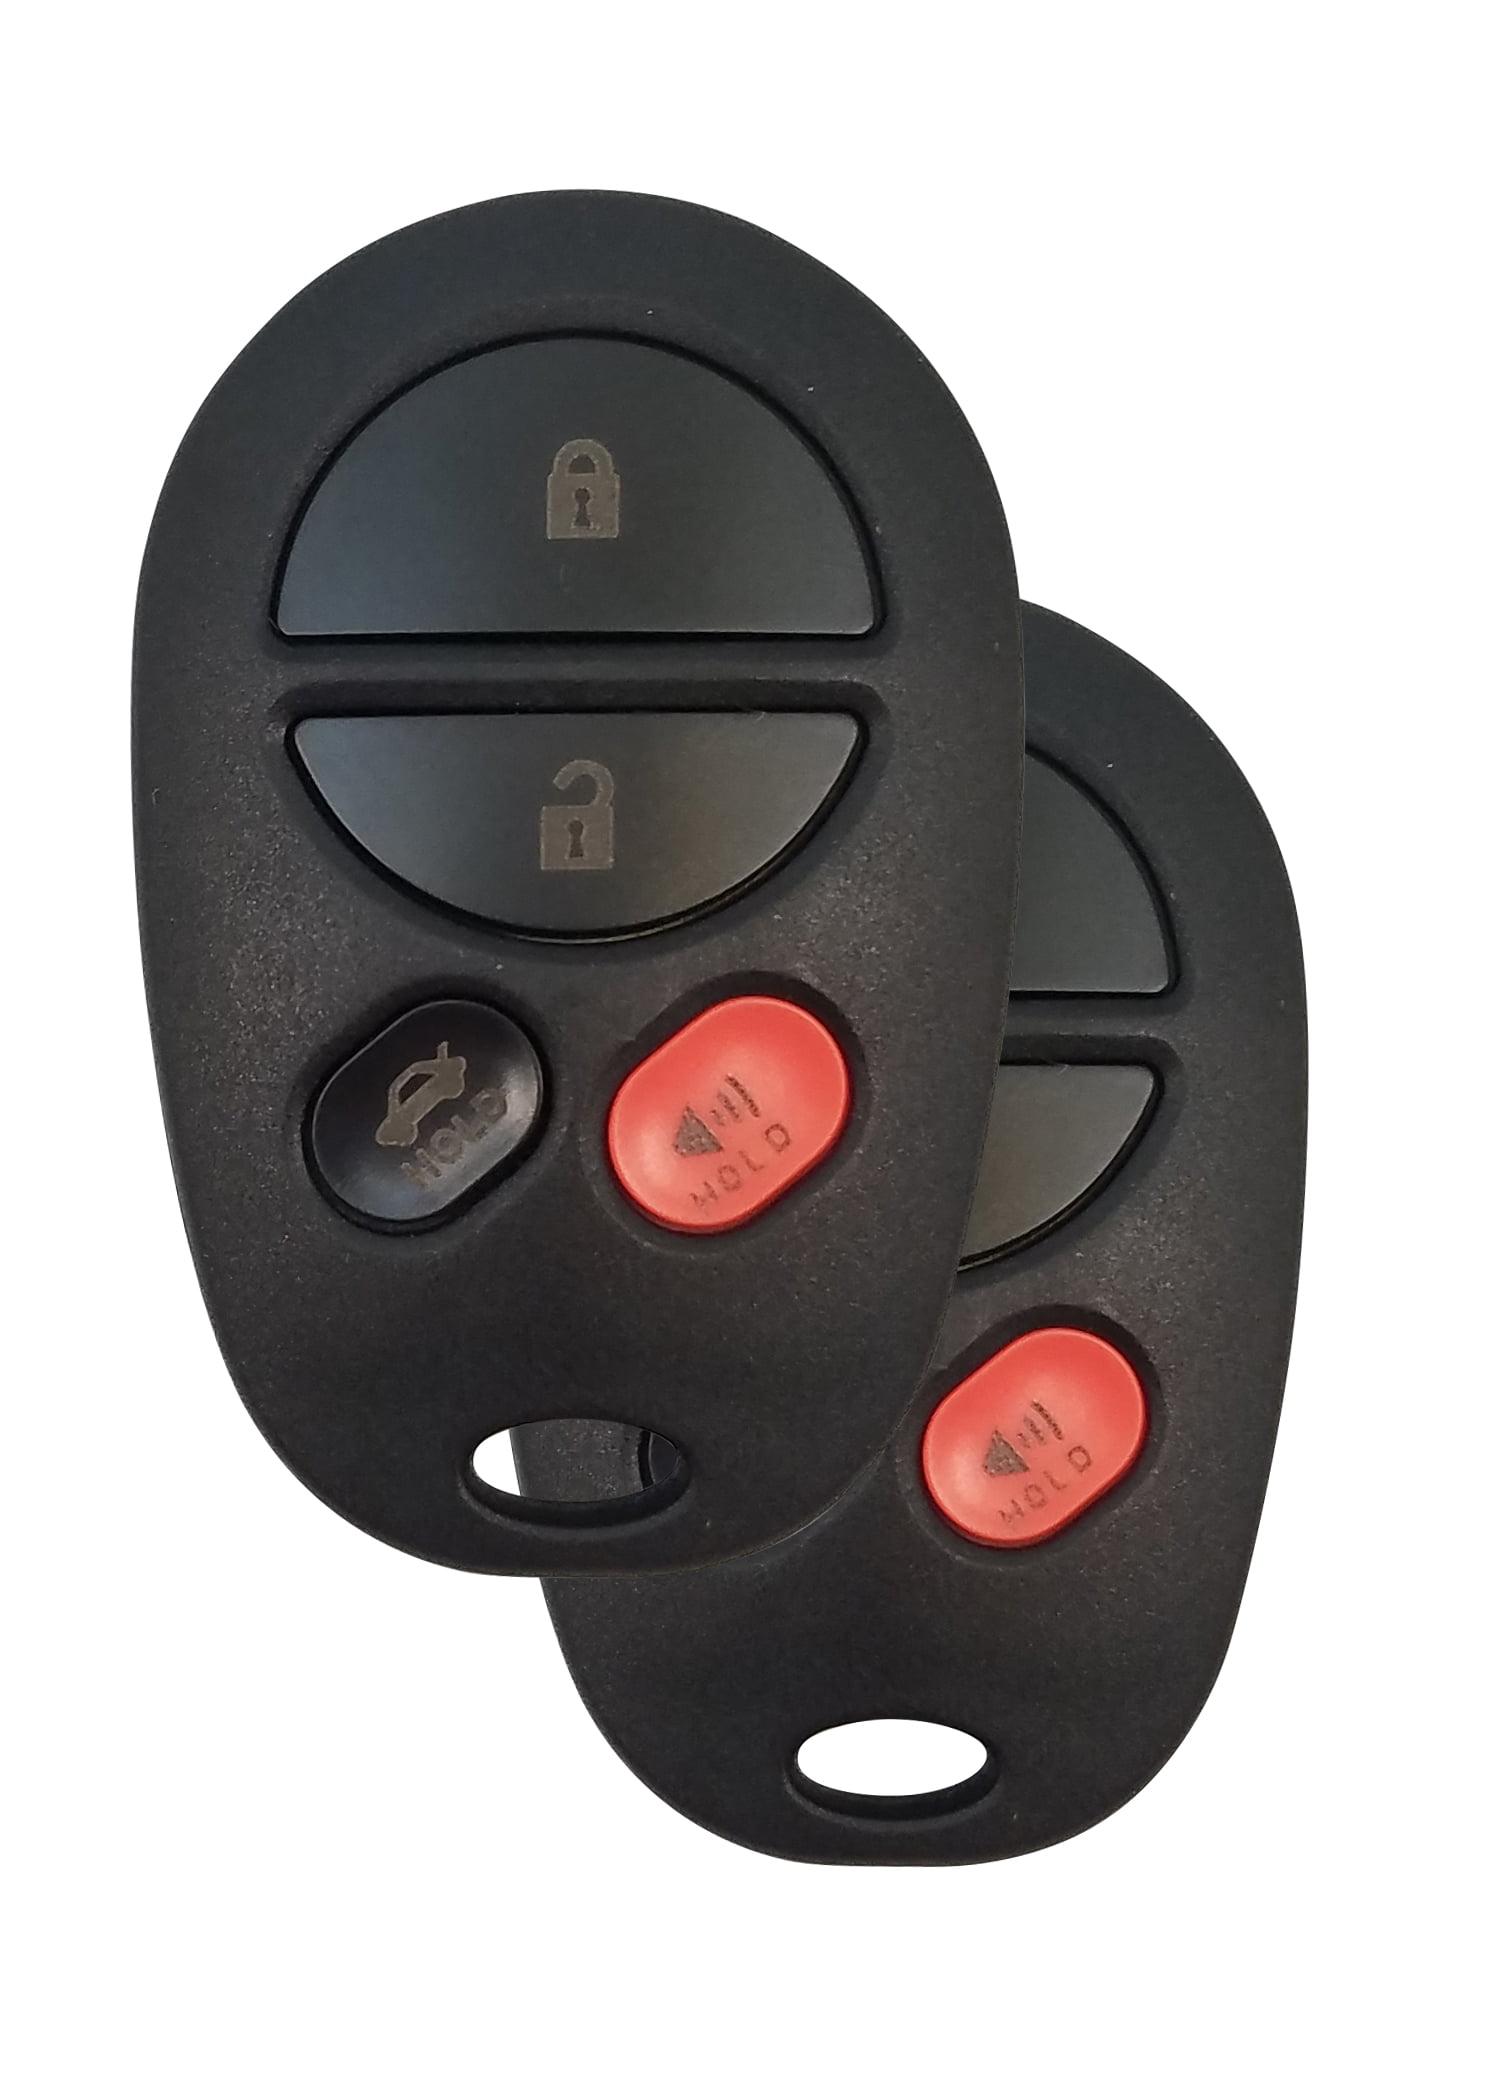 Replacement for original Toyota remote with FCC ID GQ43VT20T 4-Button Keyless Entry Remote